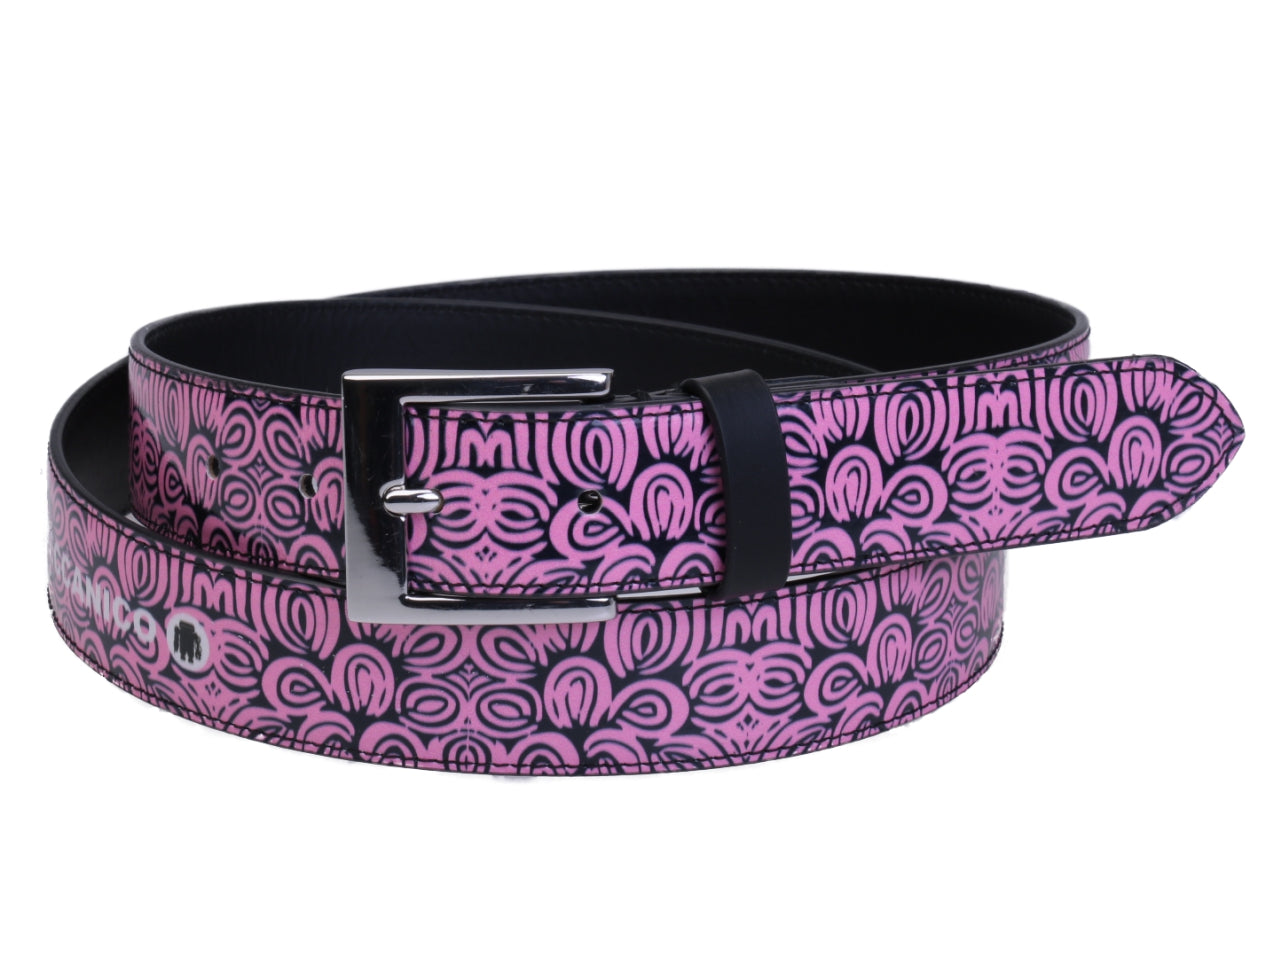 PINK AND BLACK WOMEN'S BELT WITH MAJOLICA FANTASY MADE OF LORRY TARPAULIN. - Unique Pieces Paul Meccanico